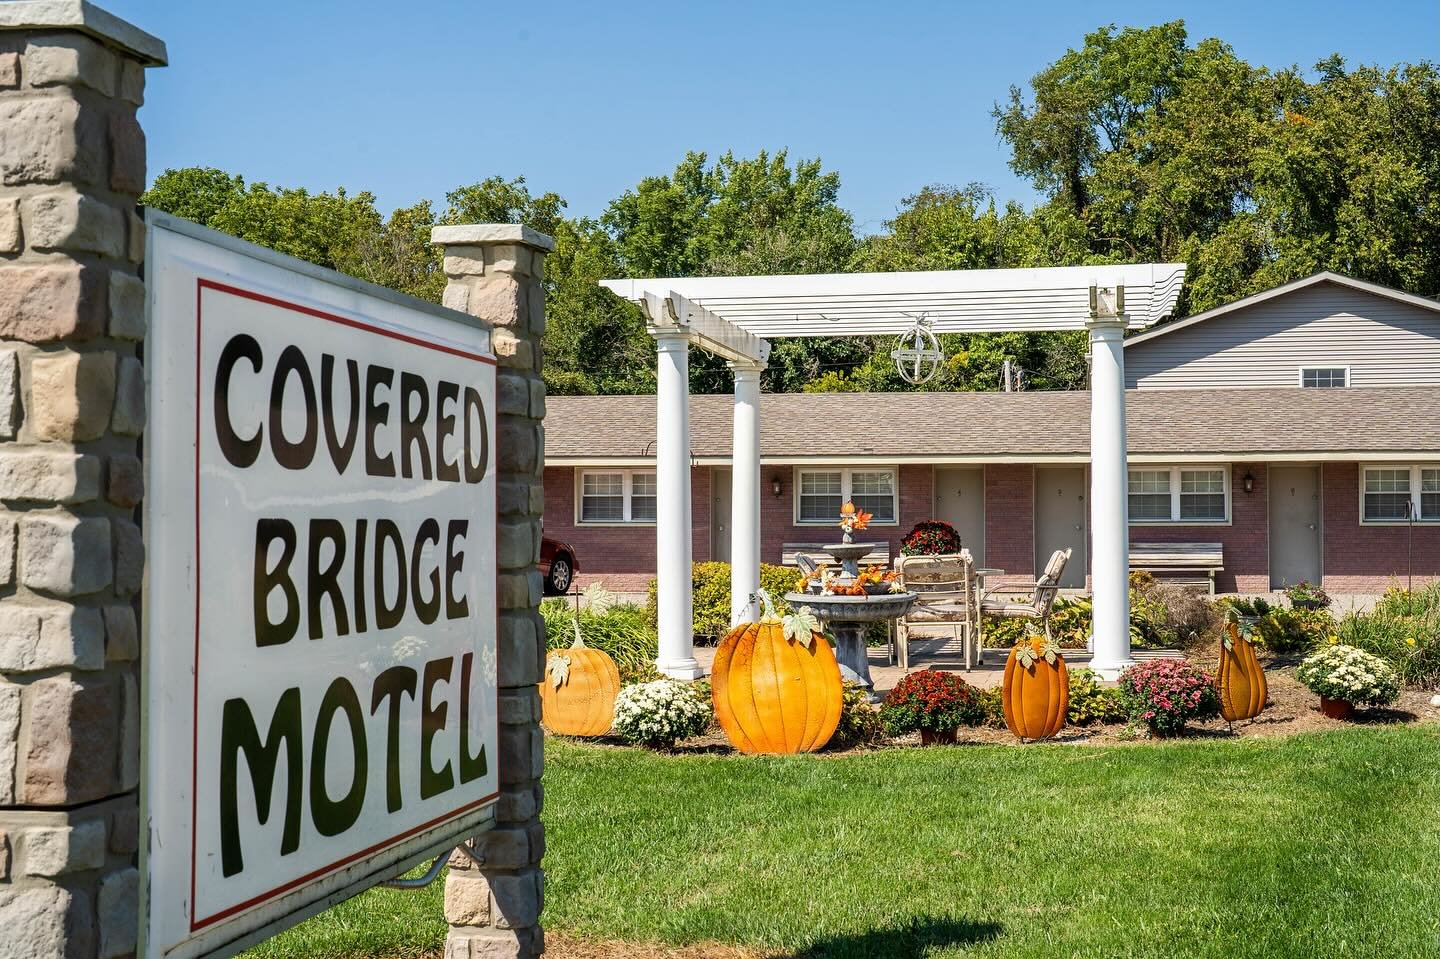 Come stay in Parke County, Indiana! ✨

Featured here is Covered Bridge Motel, centrally located in the middle of Rockville, Indiana, a great location to get to Parke County&rsquo;s attractions. Covered Bridge Motel is American-owned and operated and 